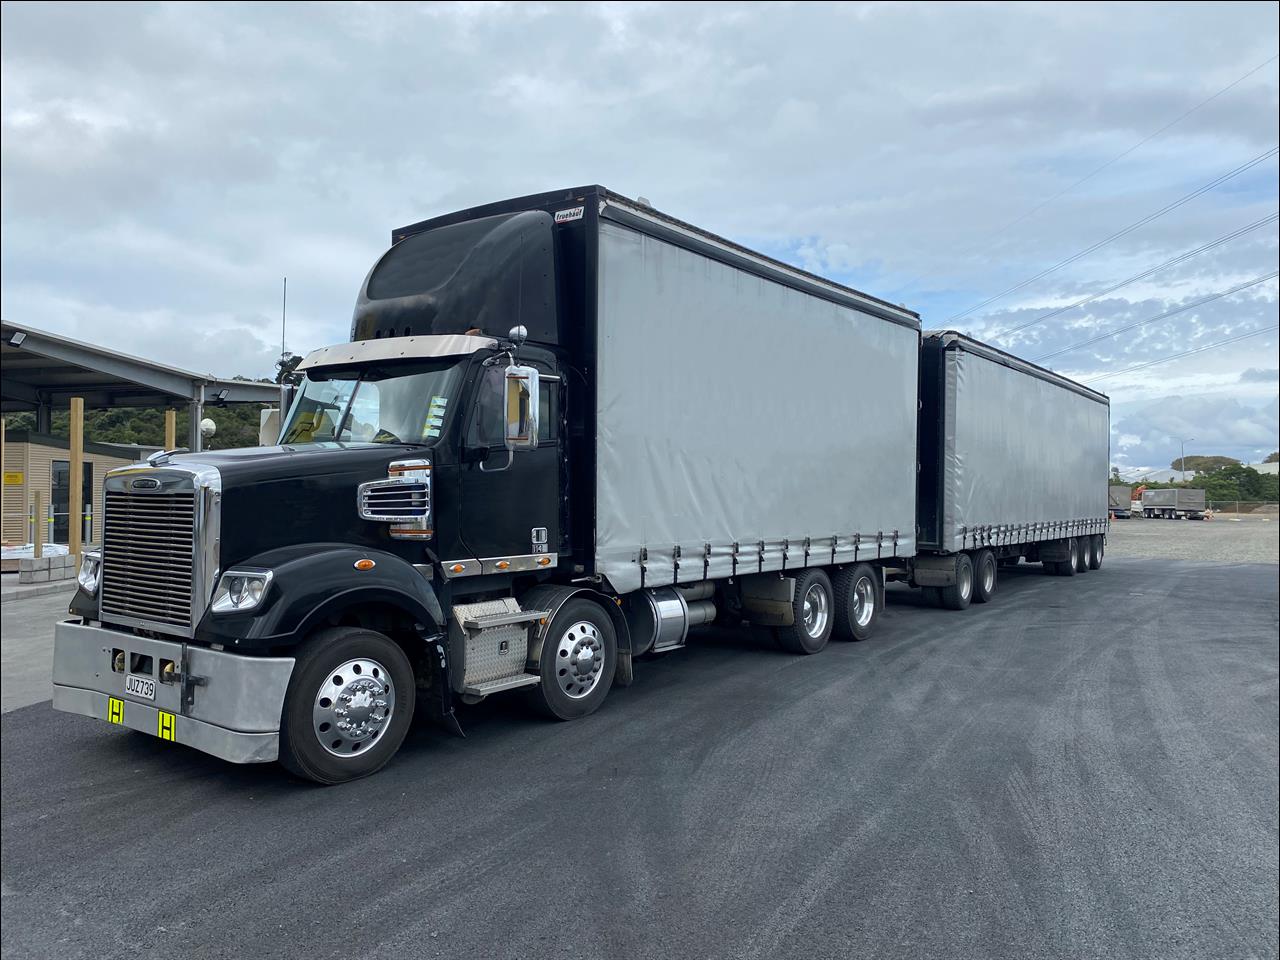 Image - 2016 Freightliner CORONADO - 8x4 Curtainsider Complete with 5 Axle Trailer